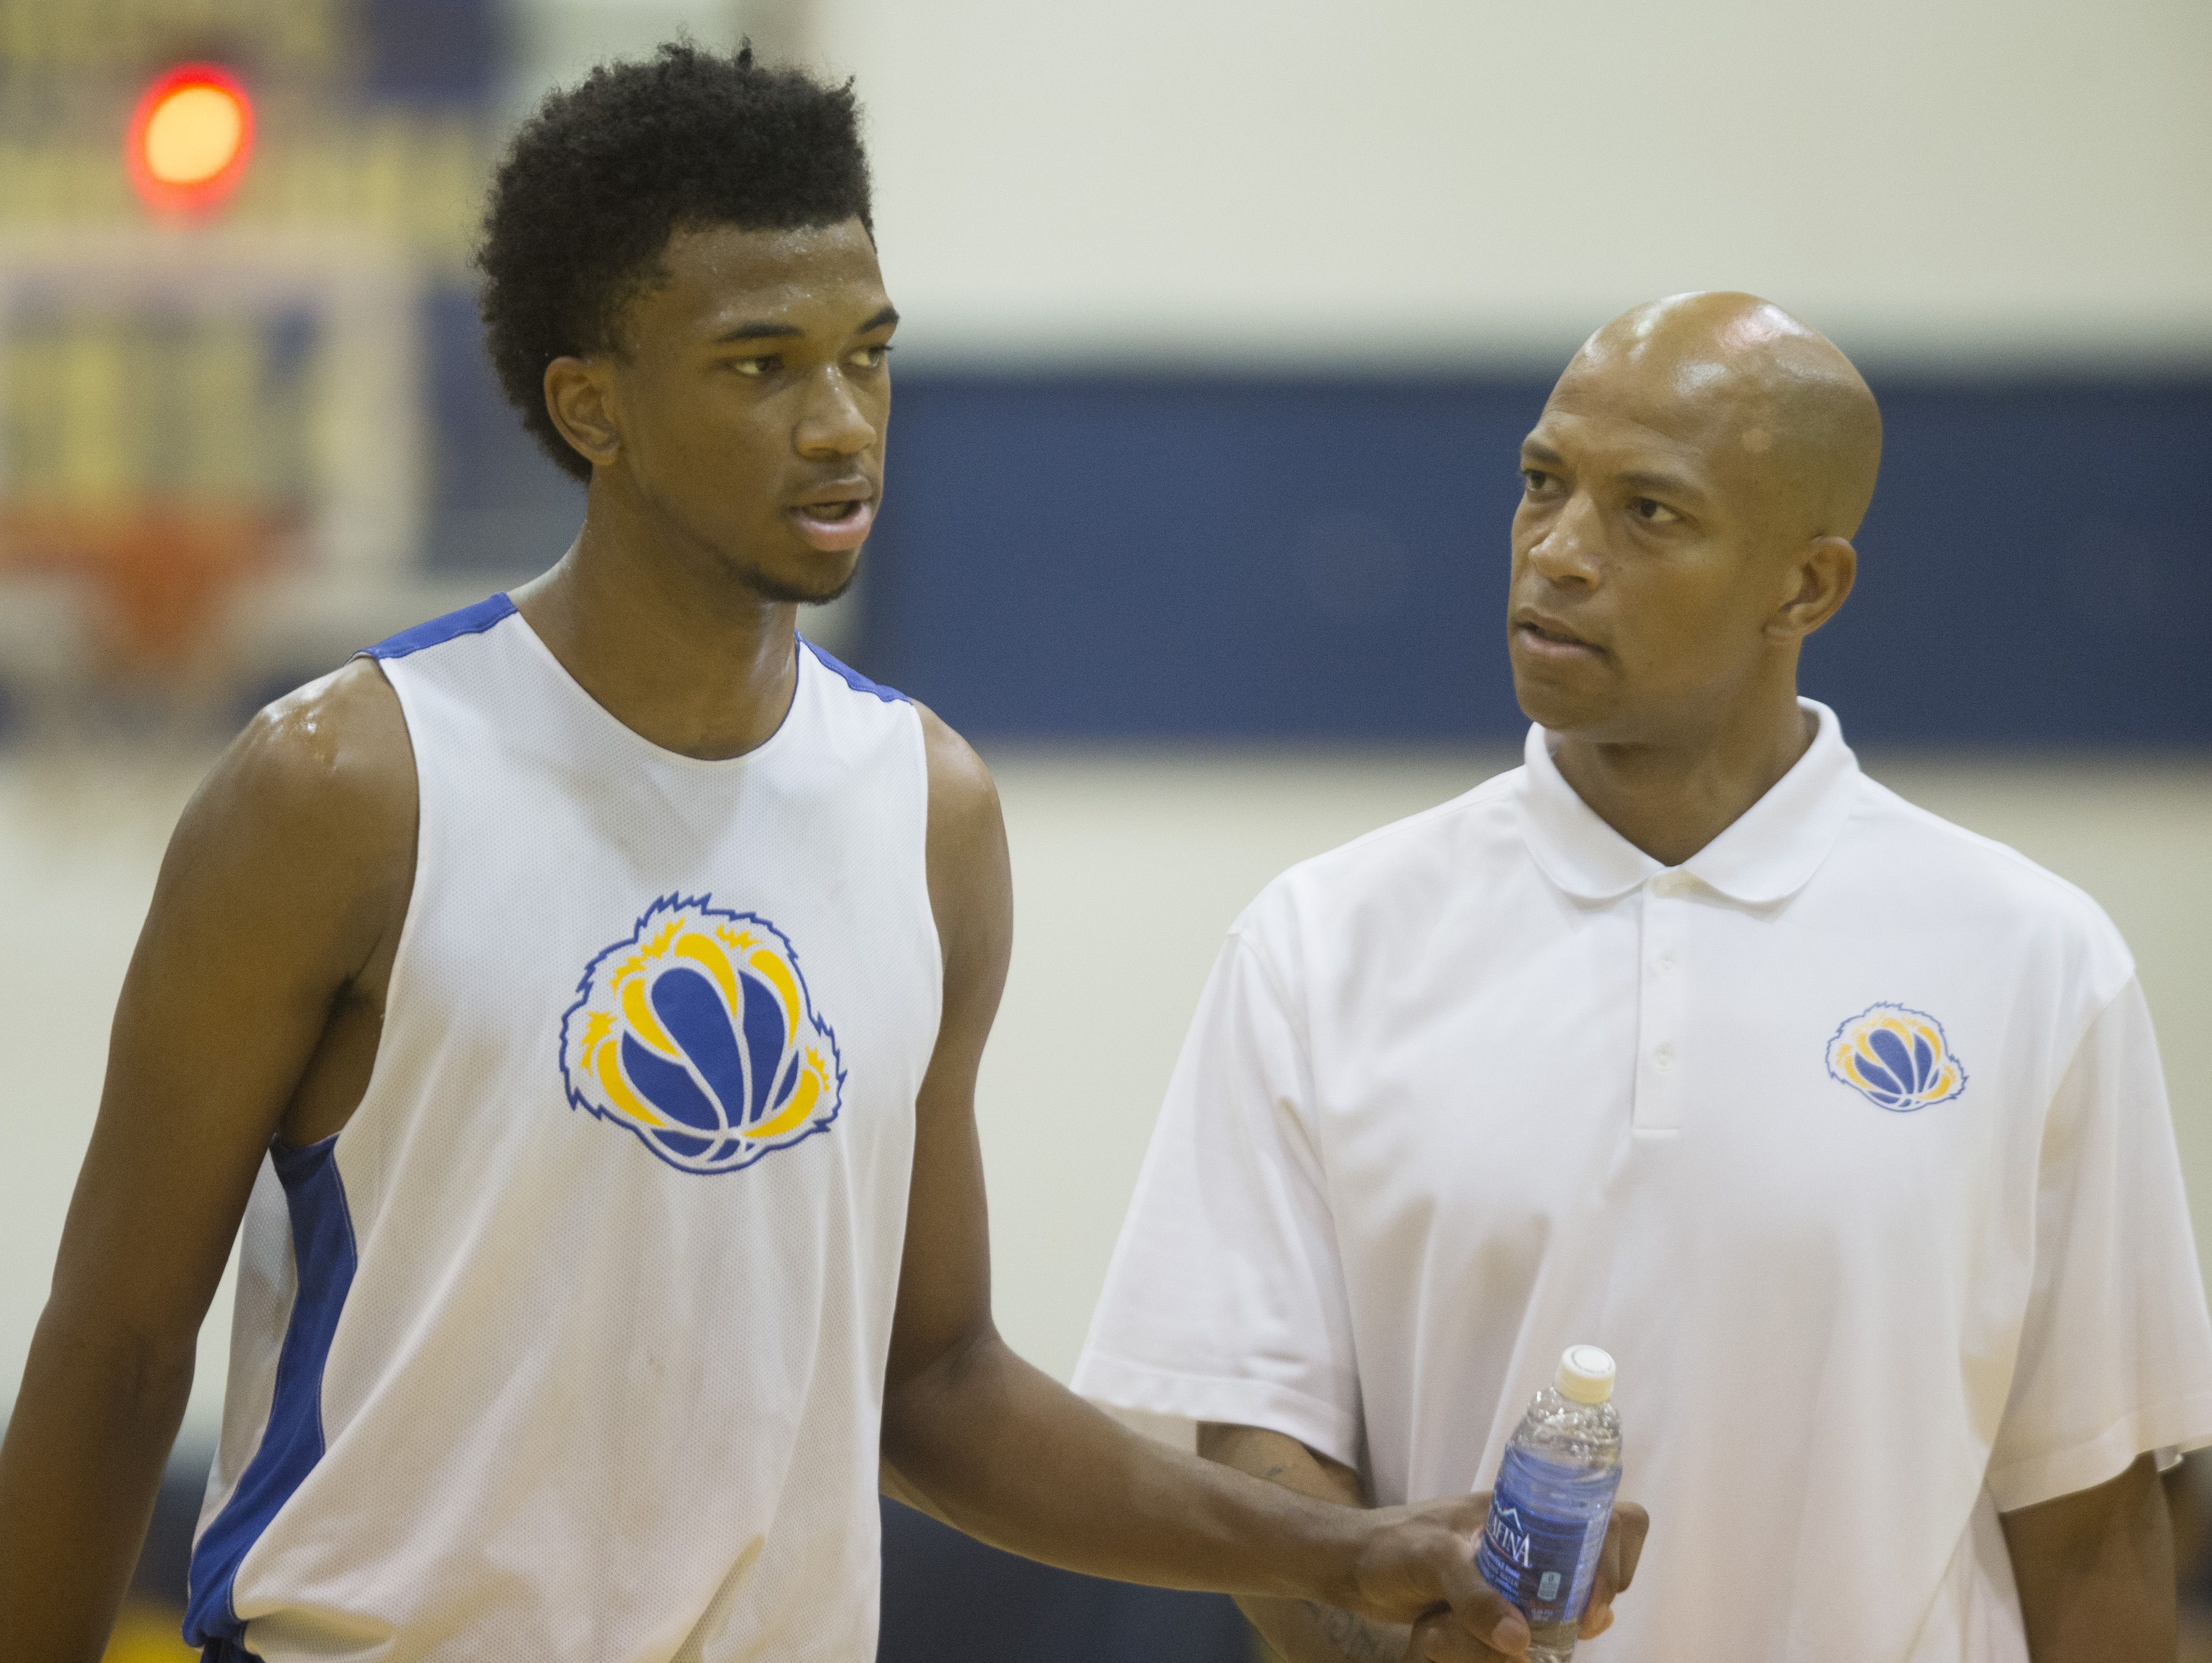 Assistant Coach Marvin Bagley Jr. (R) and his son Marvin Bagley III talk during an exhibition game against Phoenix Community College at Phoenix Community College in Phoenix, AZ on October 8, 2015.